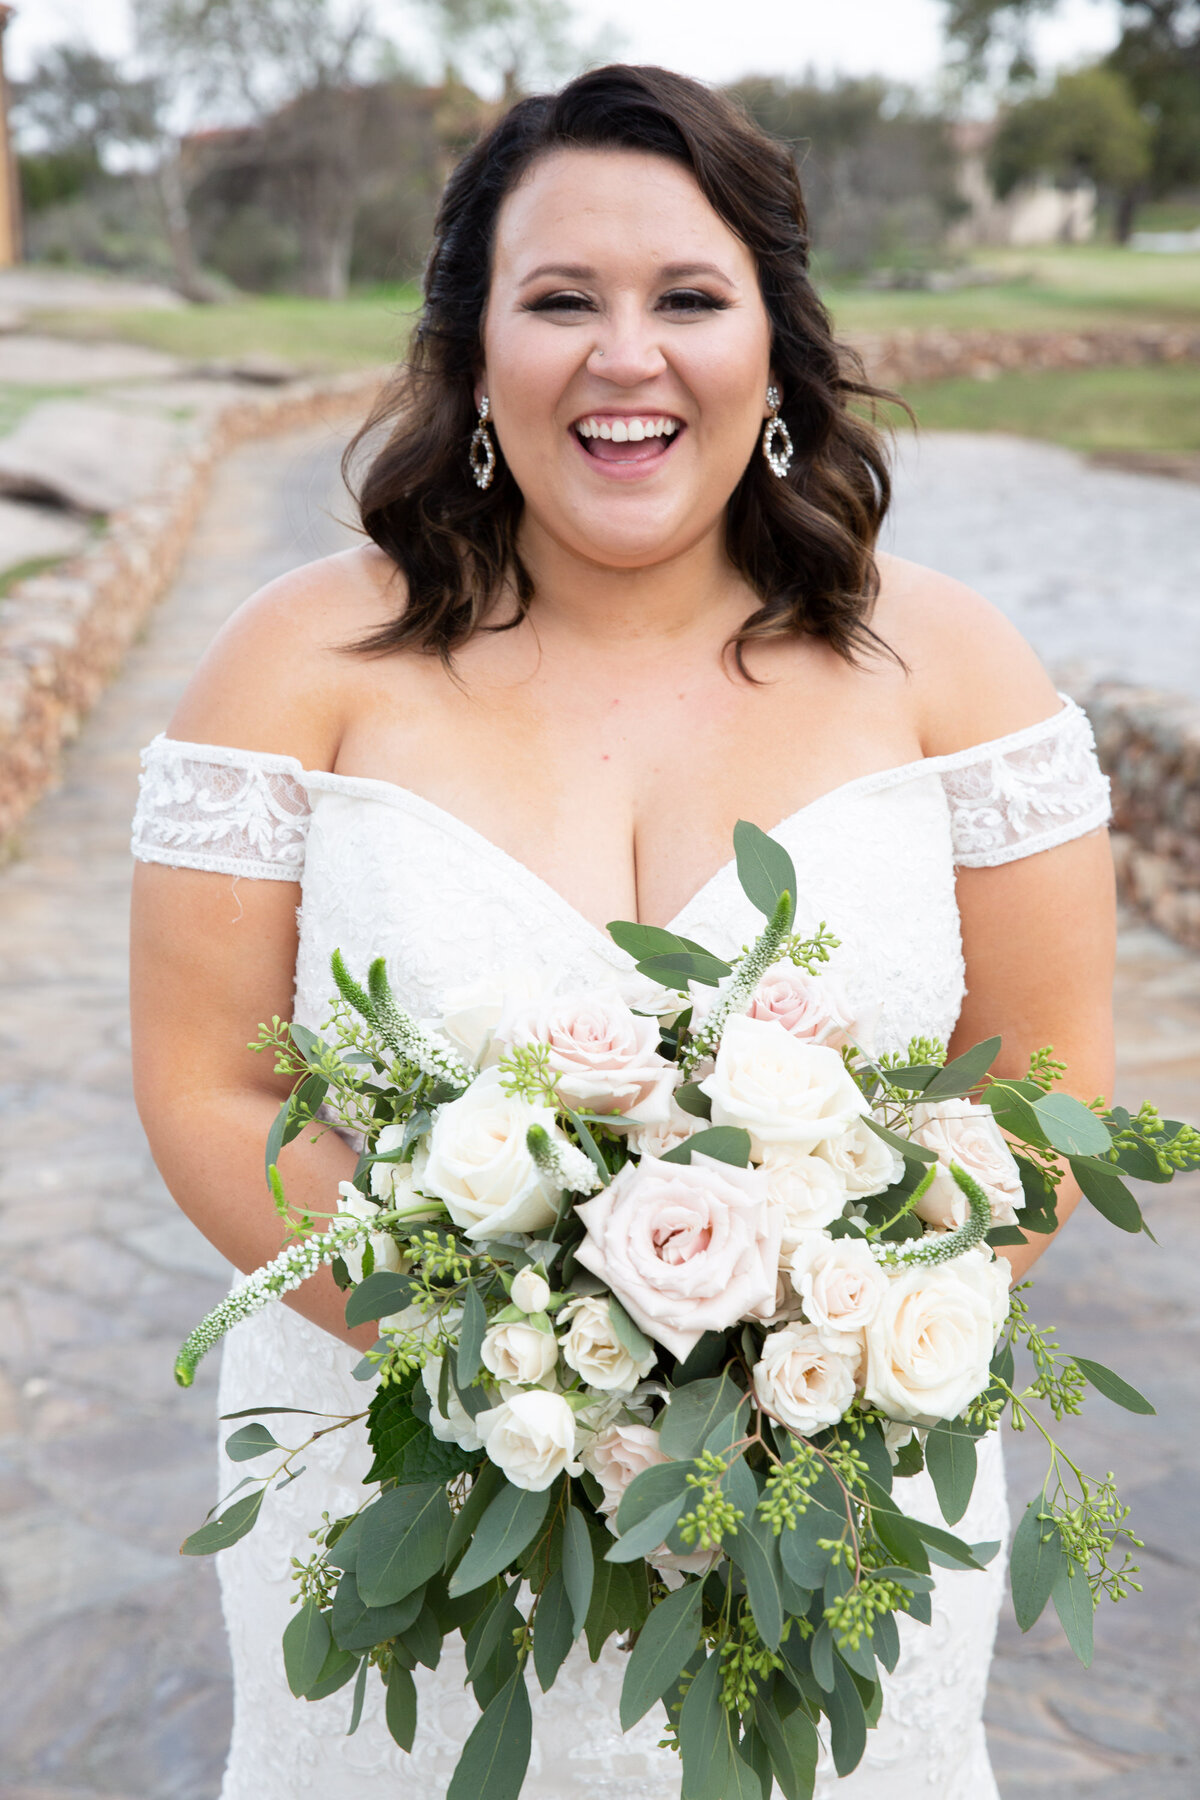 n Austin wedding photographer captures the radiant smile of a bride as she delicately holds her beautiful wedding bouquet.